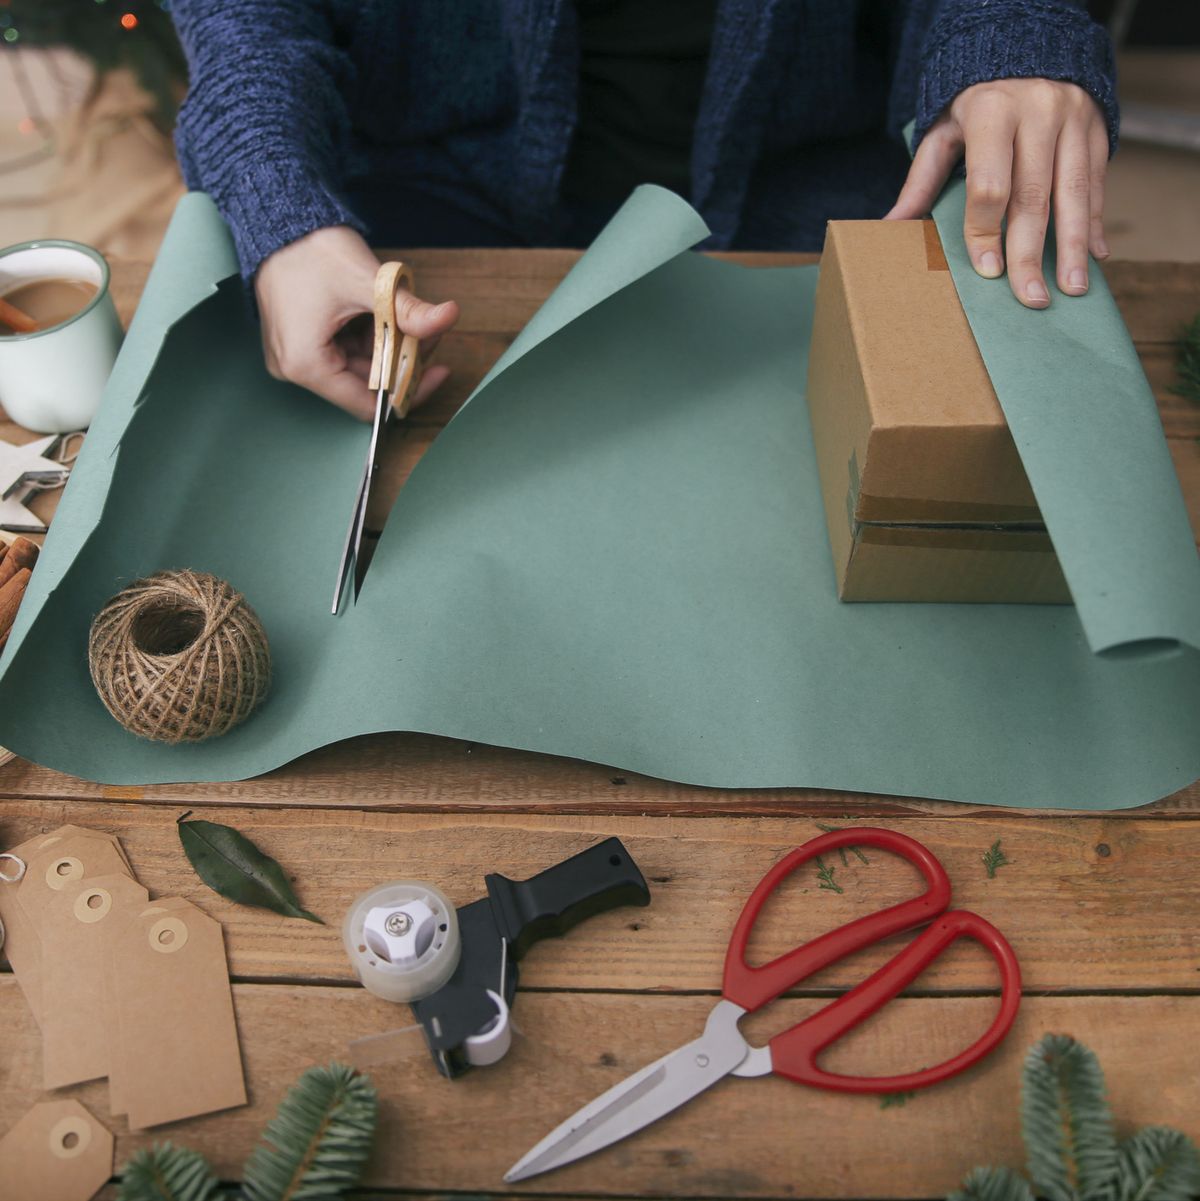 Need Gift Wrapping Tools? Check out our Wrap Buddies Review!